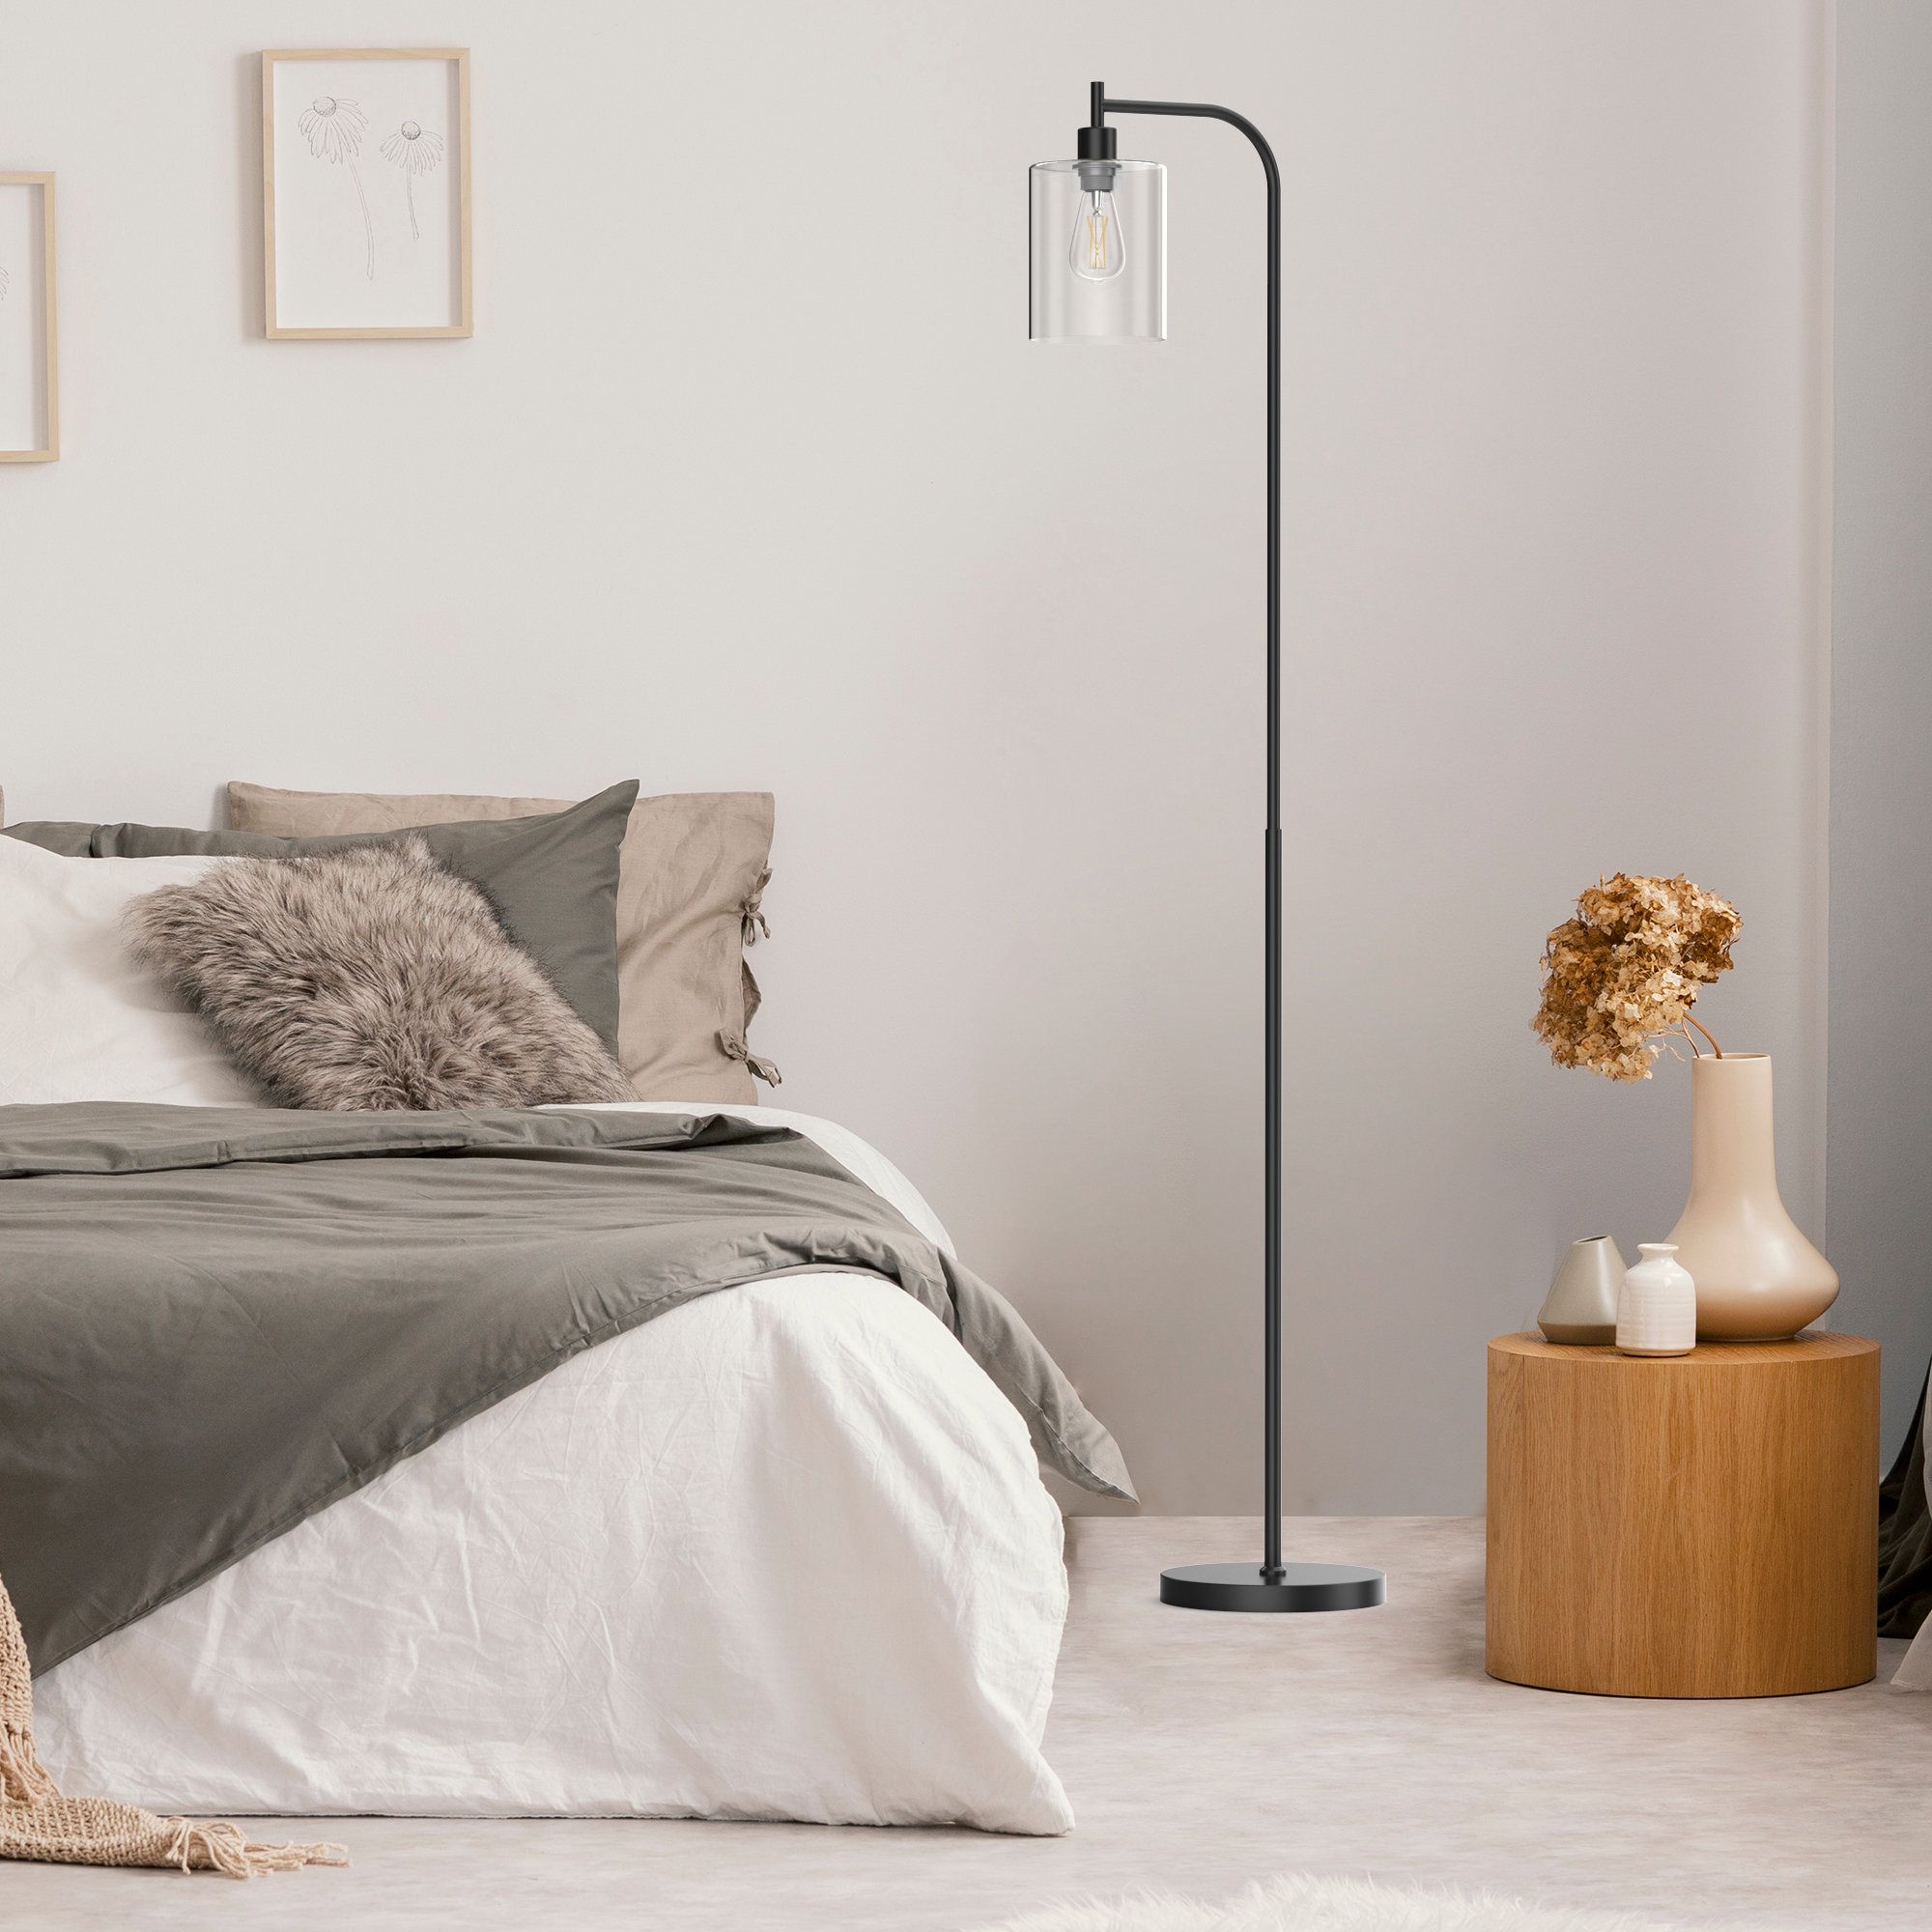 Pazzo Modern Standing Tall Industrial Arched/arc Floor Lamp With Glass  Shade And 2 Bulbs Included & Reviews | Wayfair With Regard To Modern Floor Lamps (View 9 of 20)